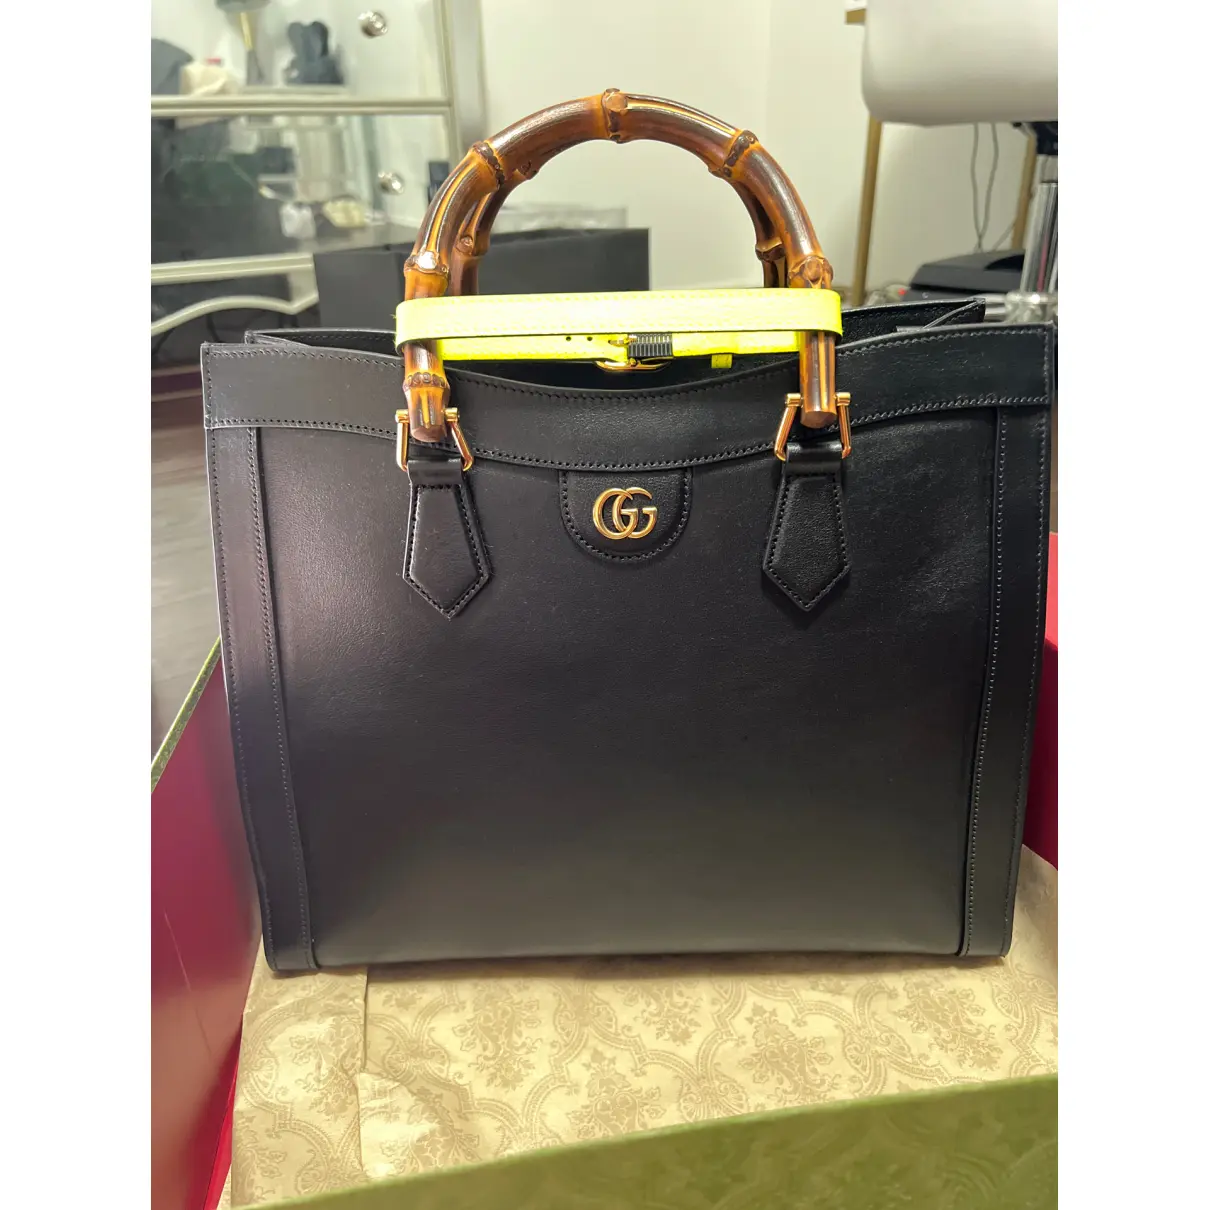 Diana Bamboo leather tote Gucci